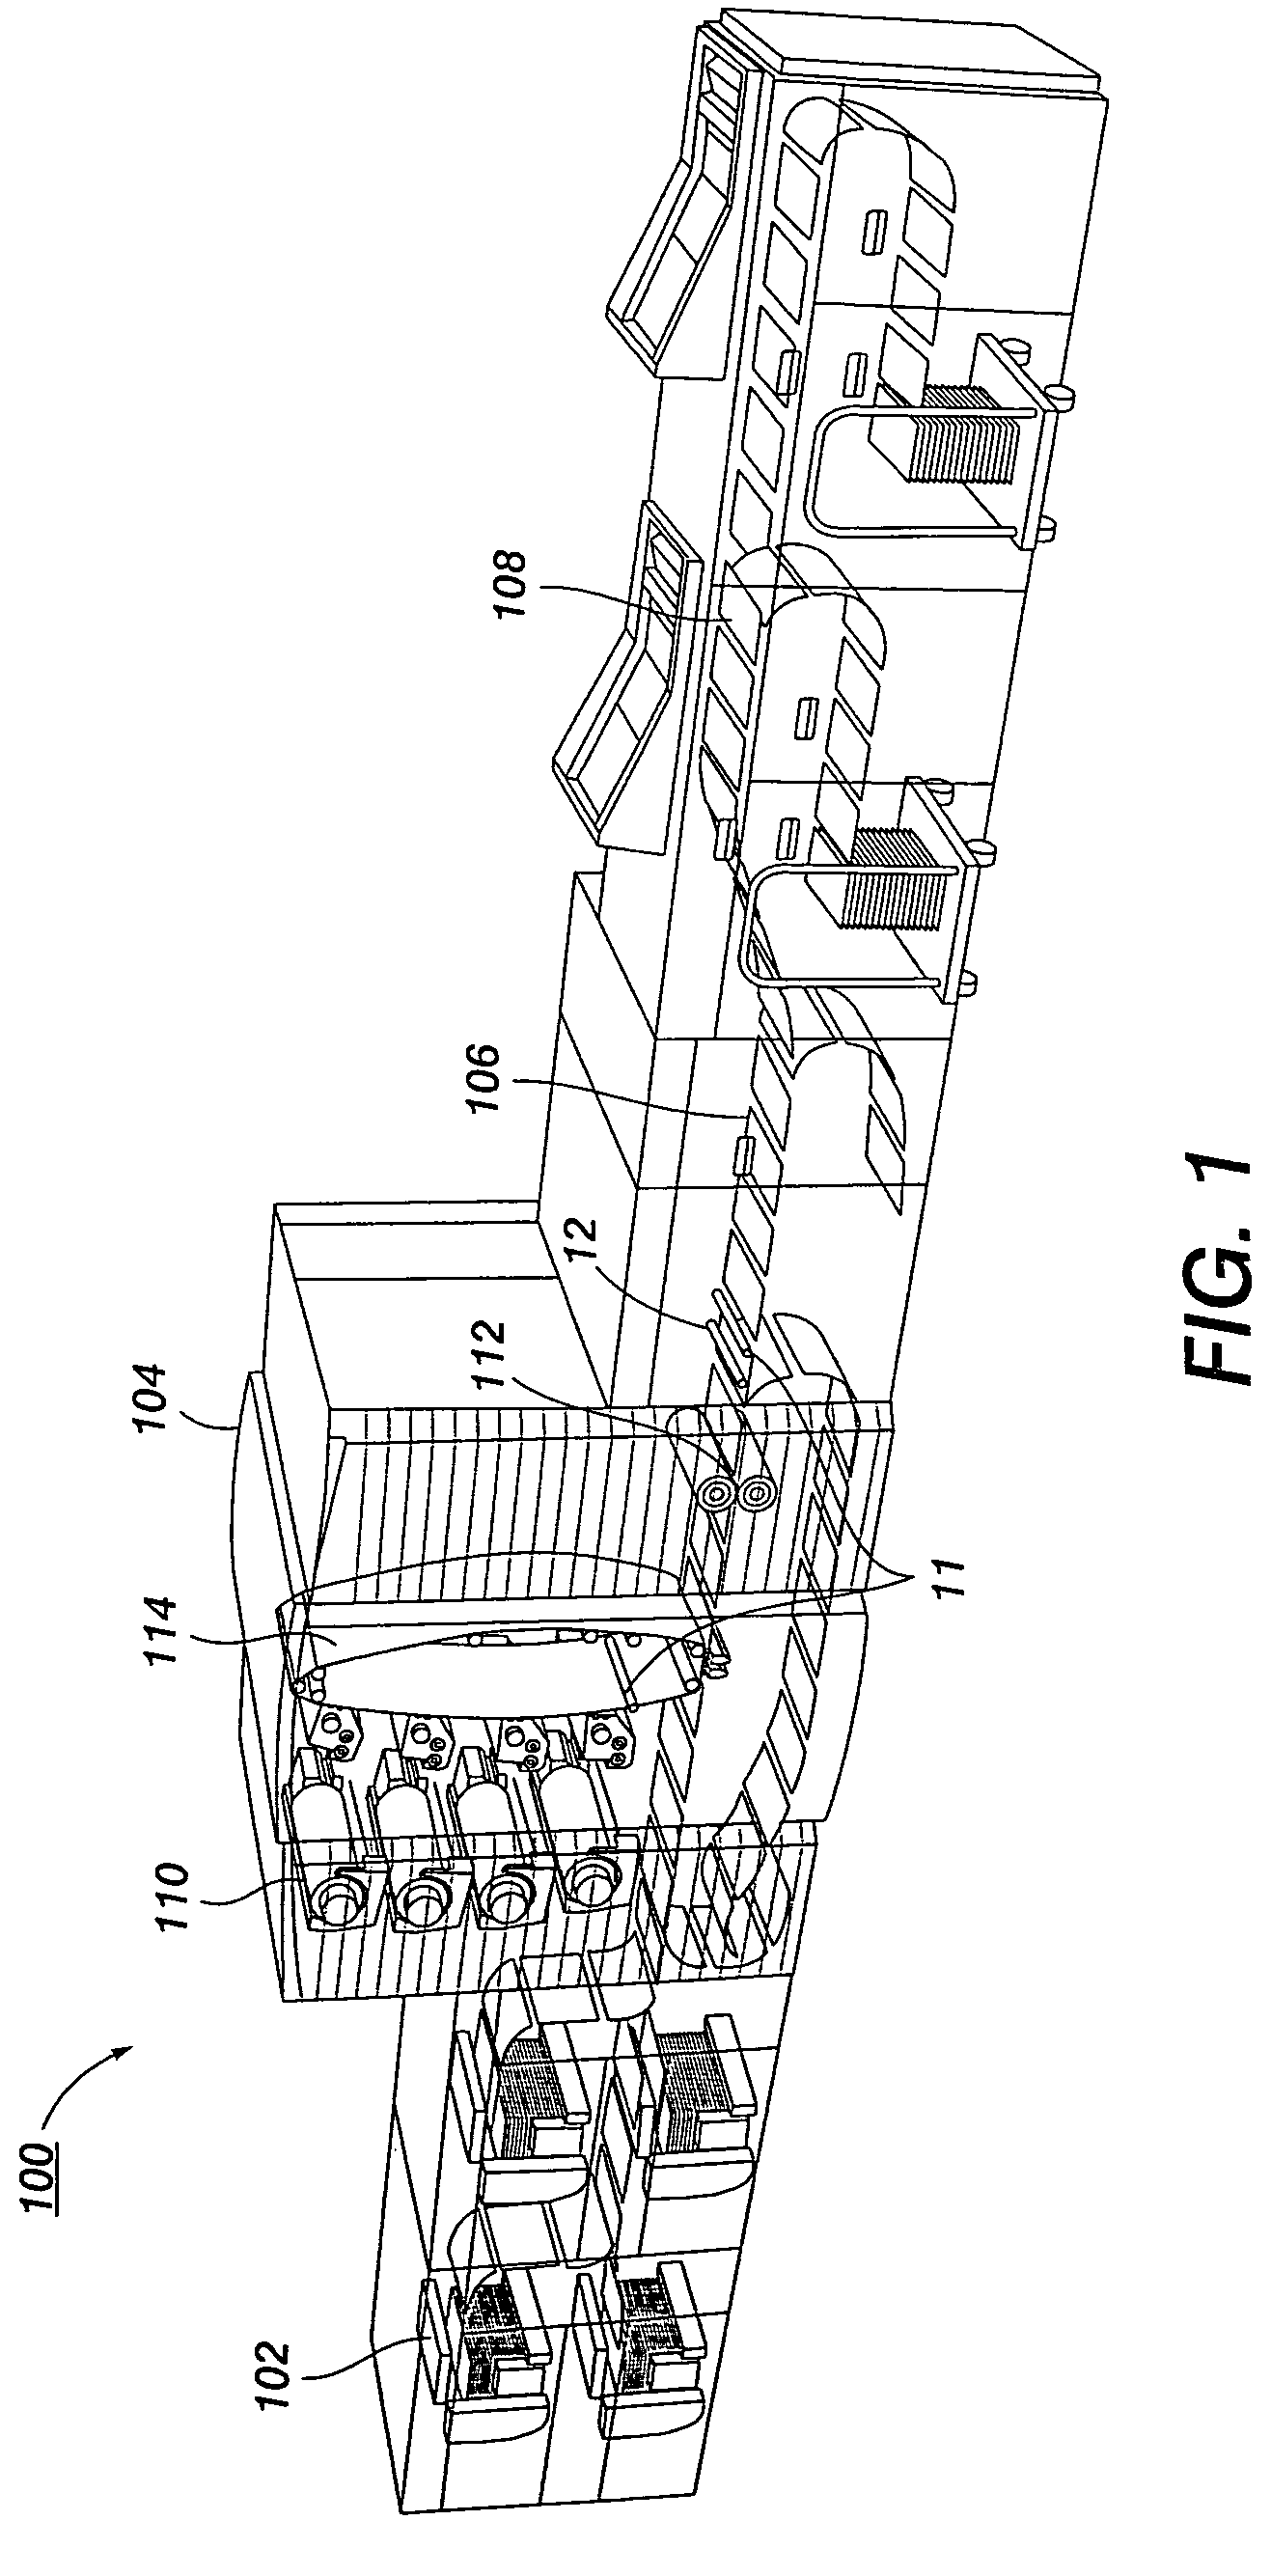 Method for spatial color calibration using hybrid sensing systems